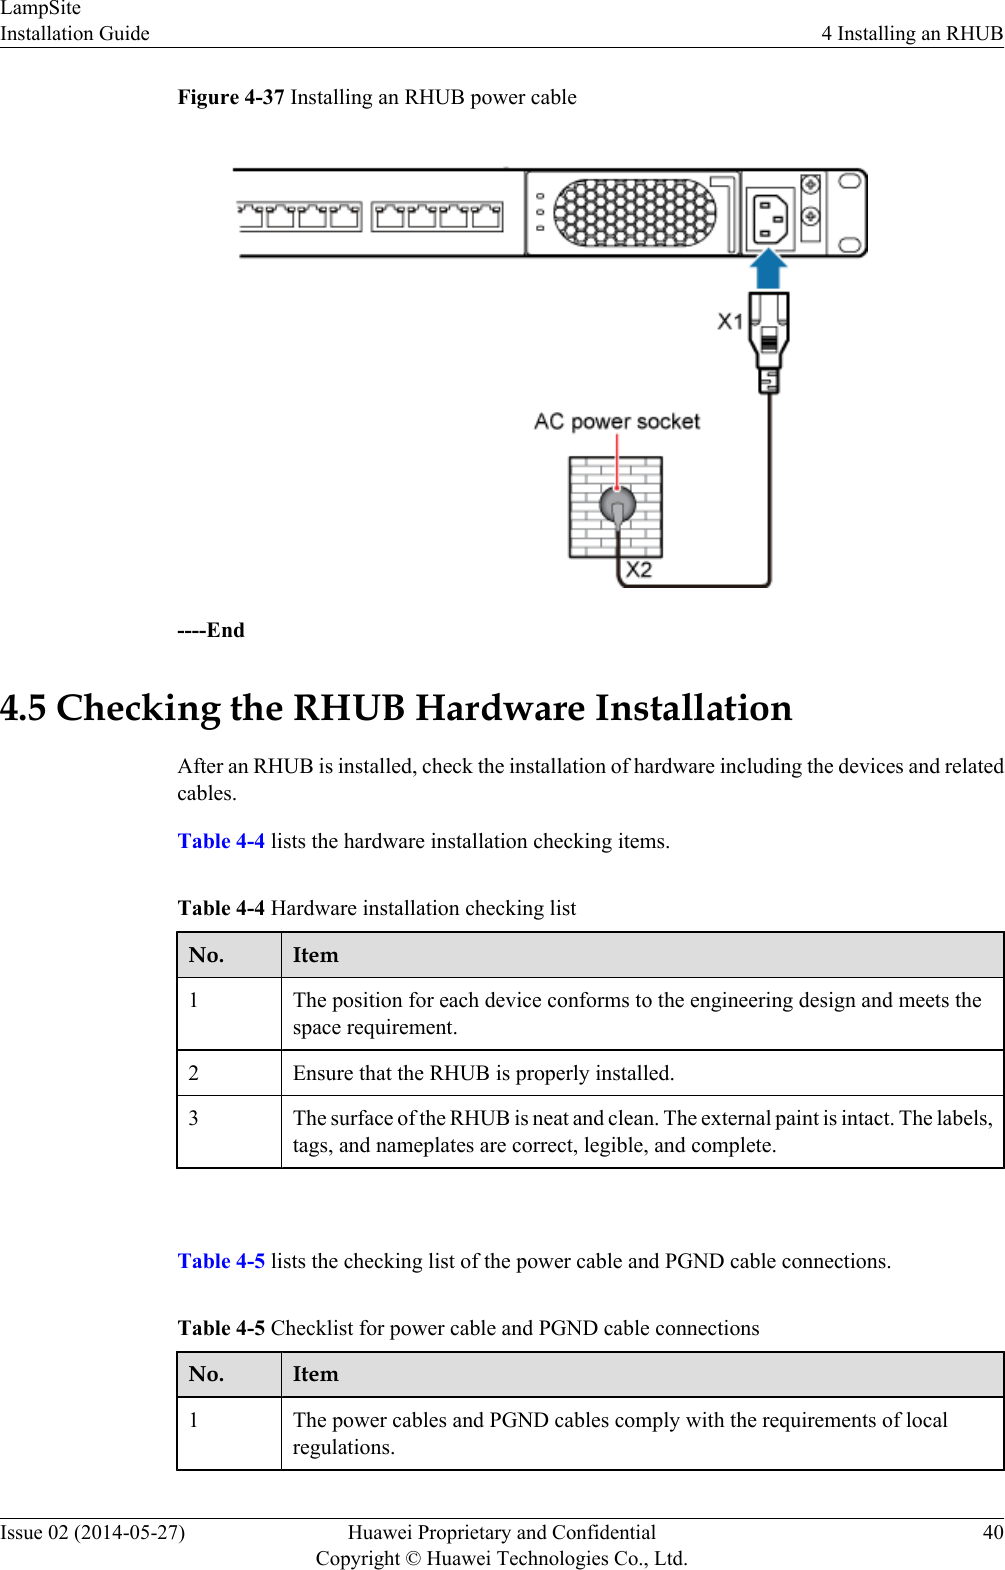 Figure 4-37 Installing an RHUB power cable----End4.5 Checking the RHUB Hardware InstallationAfter an RHUB is installed, check the installation of hardware including the devices and relatedcables.Table 4-4 lists the hardware installation checking items.Table 4-4 Hardware installation checking listNo. Item1The position for each device conforms to the engineering design and meets thespace requirement.2 Ensure that the RHUB is properly installed.3 The surface of the RHUB is neat and clean. The external paint is intact. The labels,tags, and nameplates are correct, legible, and complete. Table 4-5 lists the checking list of the power cable and PGND cable connections.Table 4-5 Checklist for power cable and PGND cable connectionsNo. Item1The power cables and PGND cables comply with the requirements of localregulations.LampSiteInstallation Guide 4 Installing an RHUBIssue 02 (2014-05-27) Huawei Proprietary and ConfidentialCopyright © Huawei Technologies Co., Ltd.40